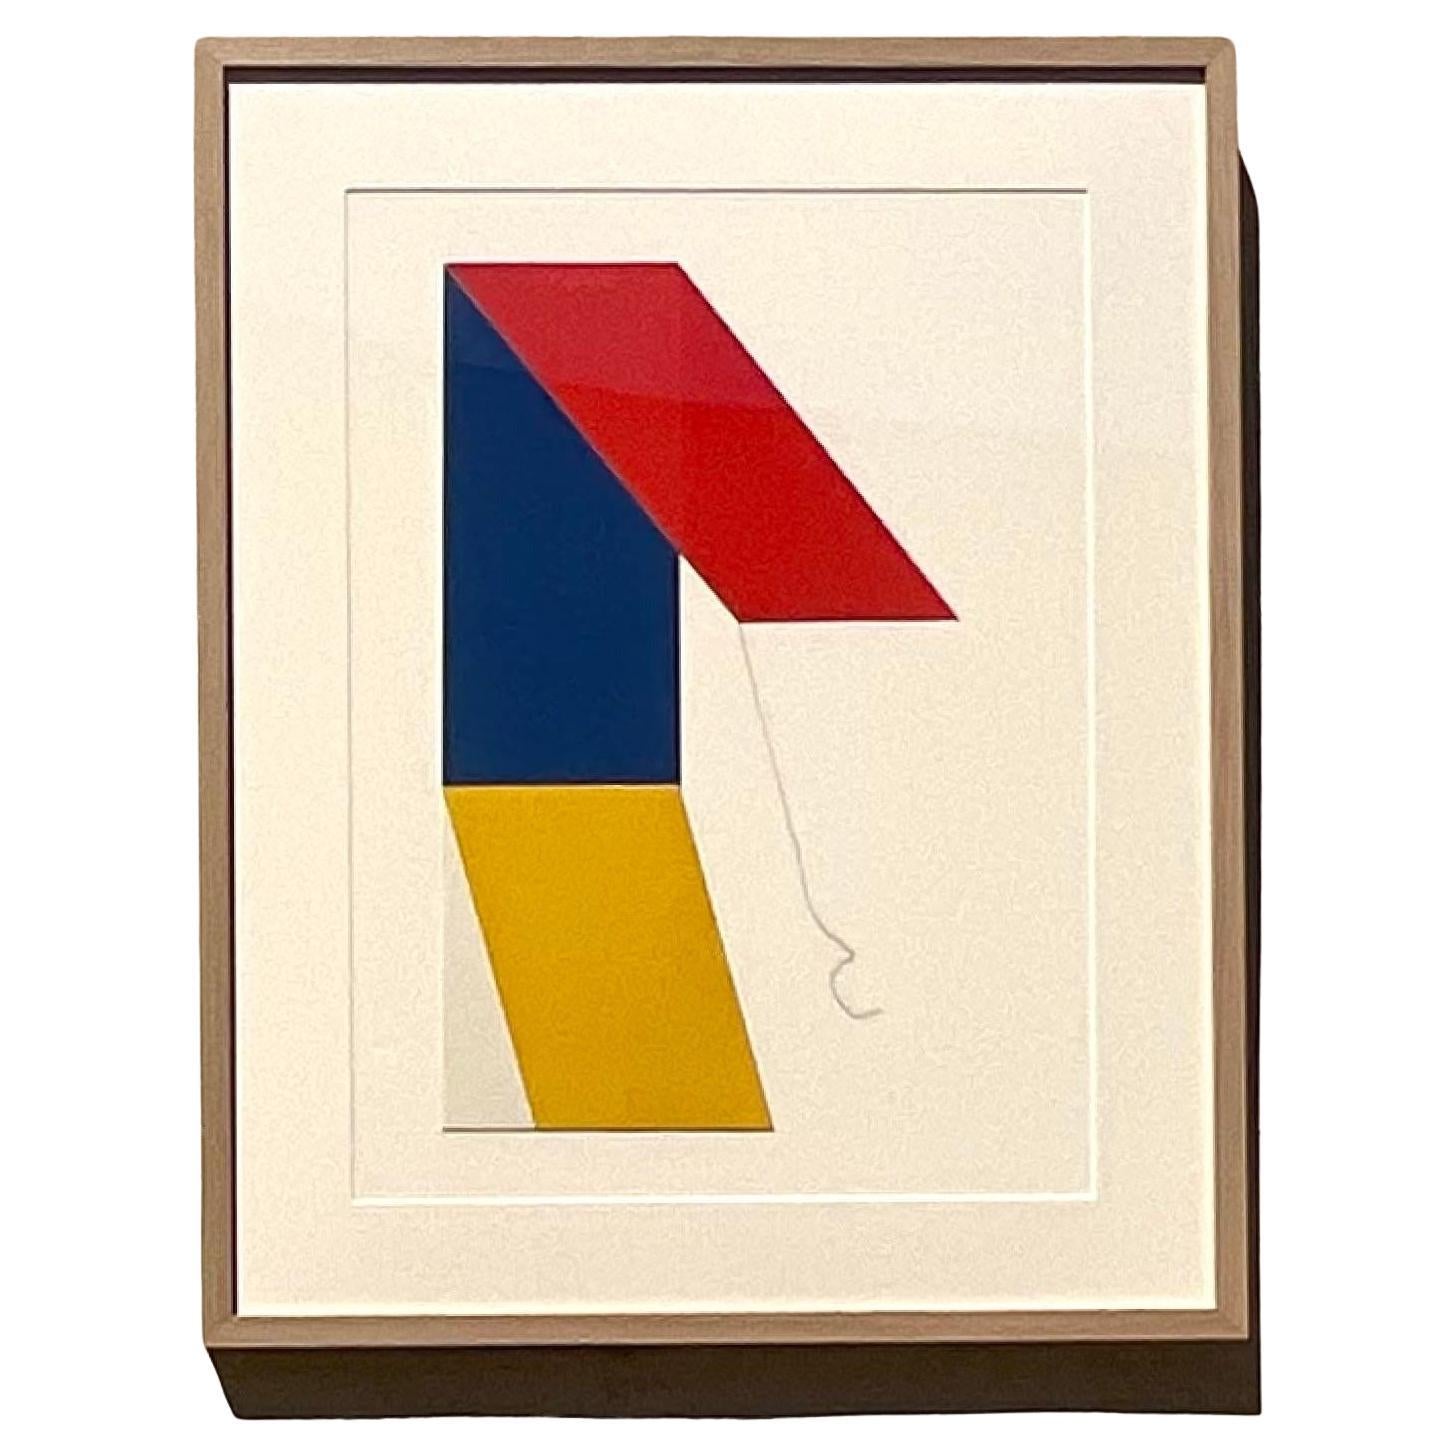 Vintage 1970s Abstract Geometric Lithograph For Sale